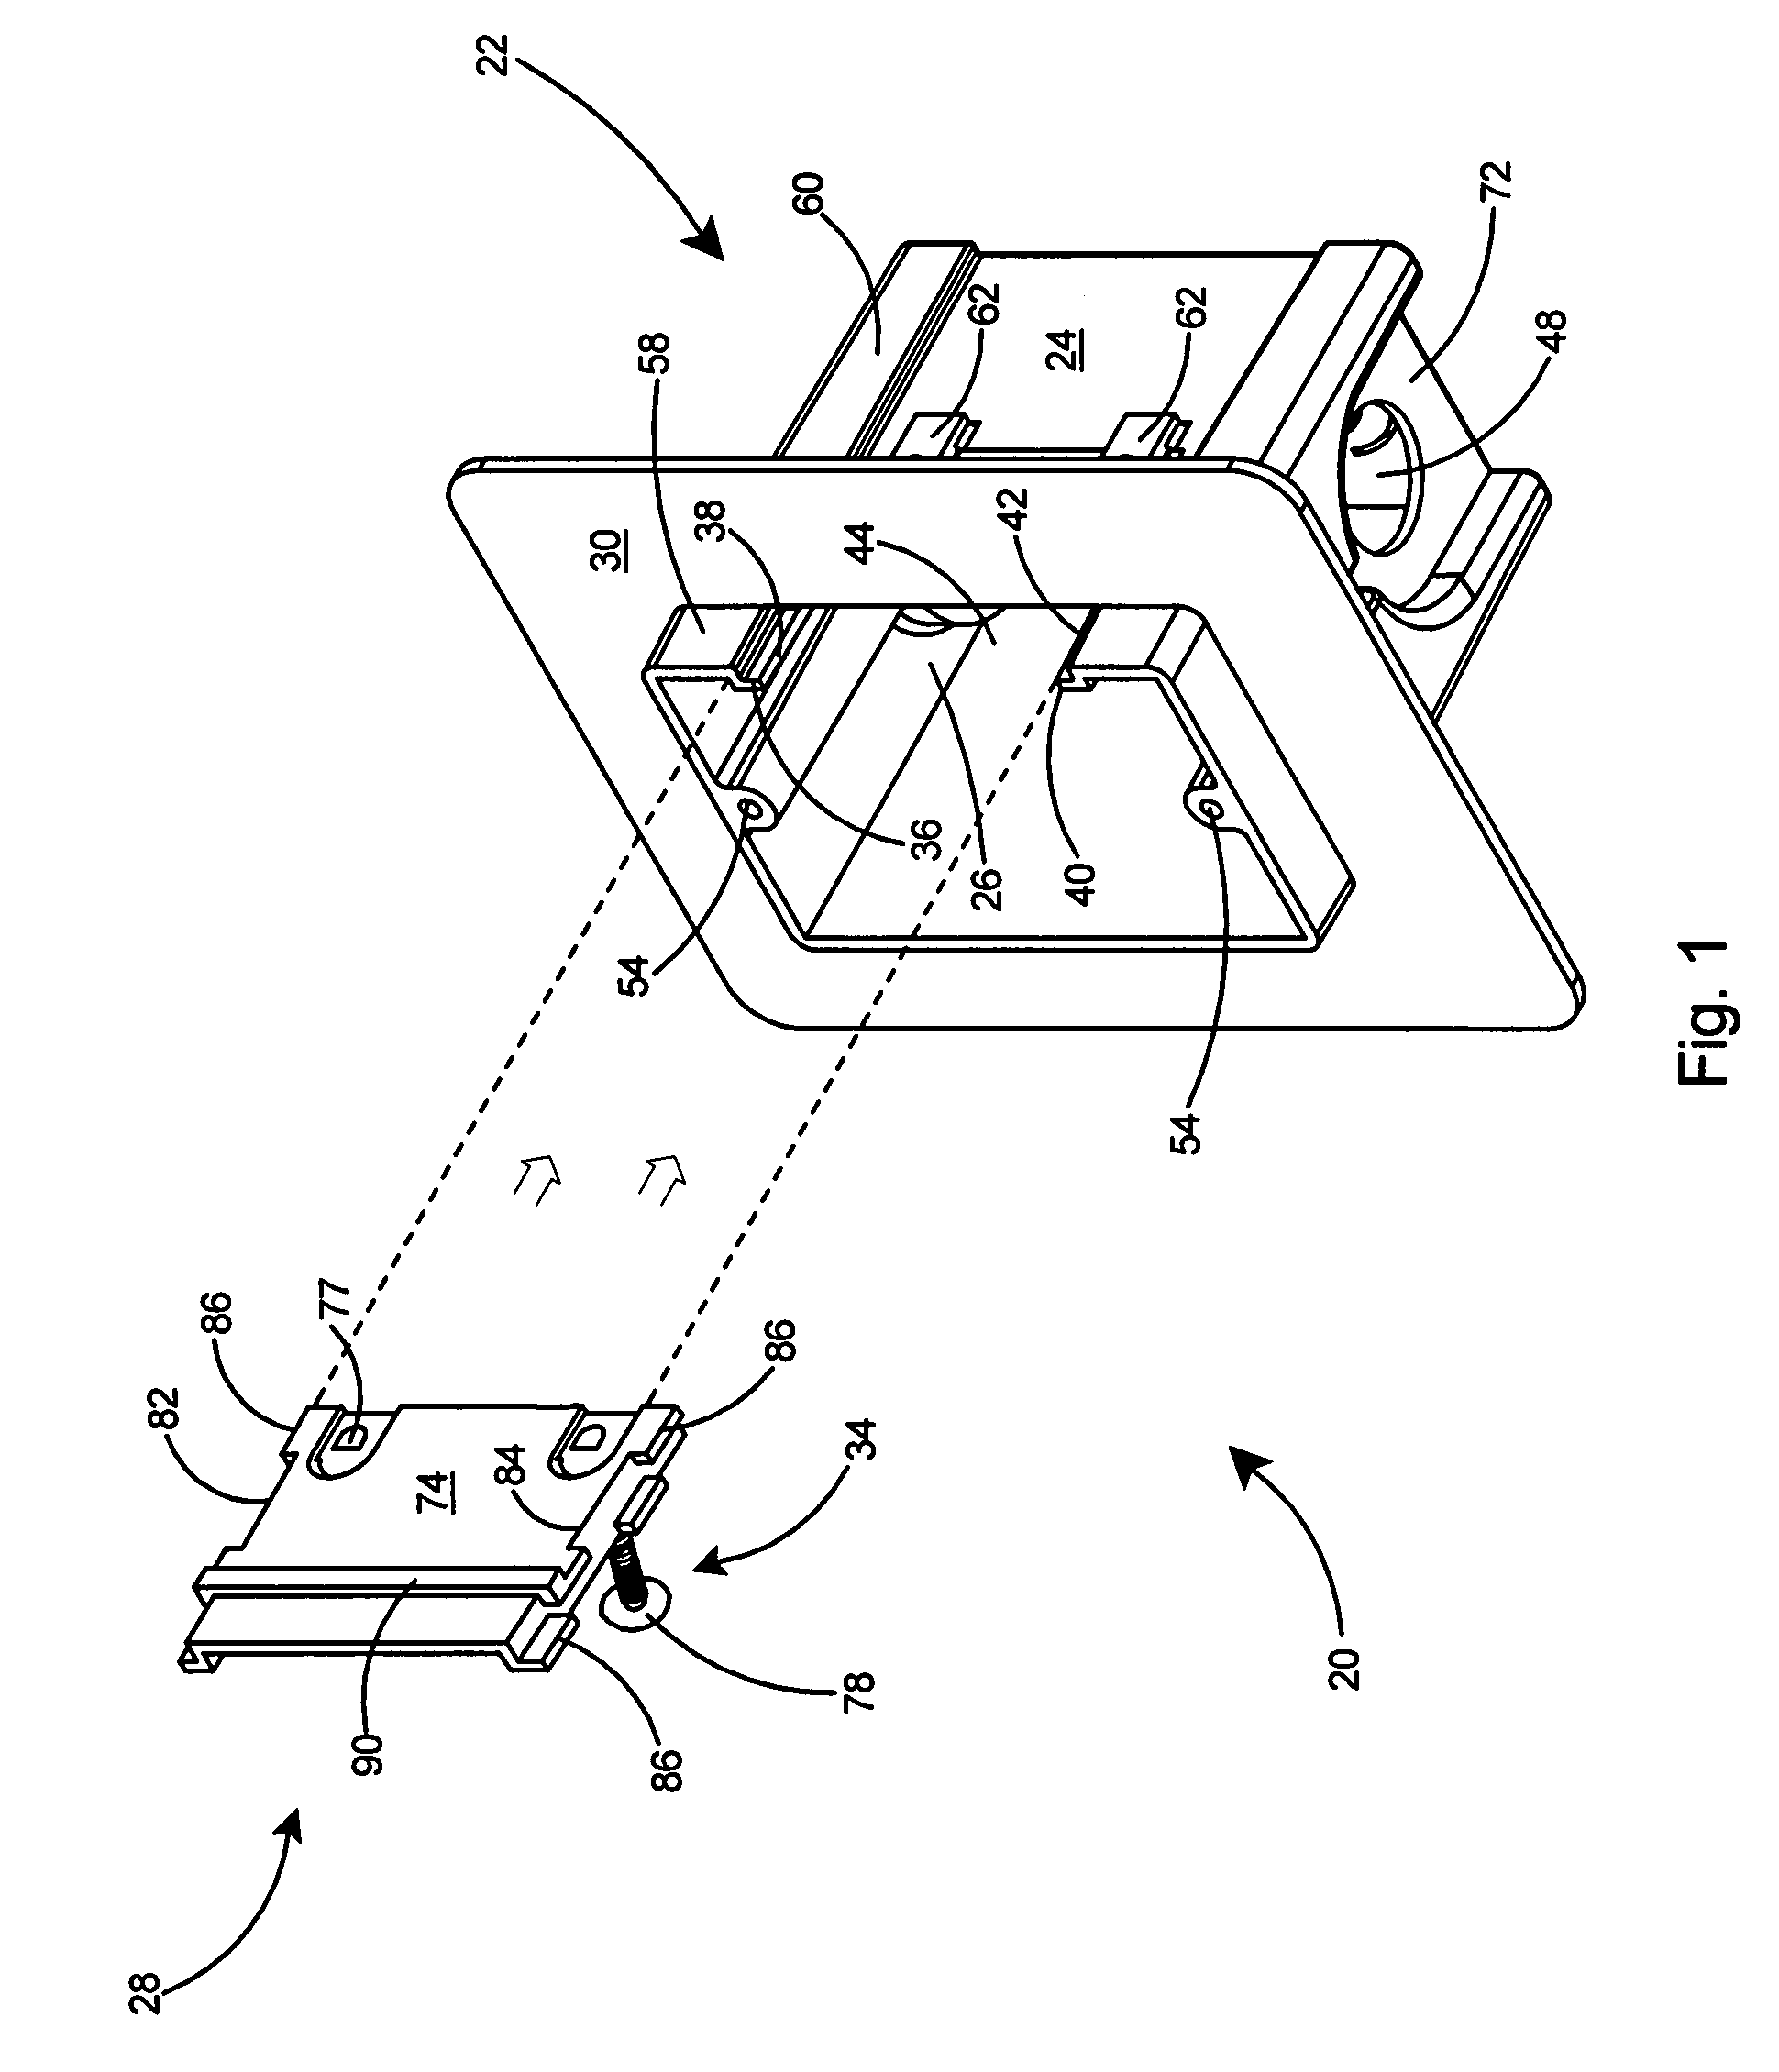 Electrical box assembly with internal mounting arrangement and flange to seal against air infiltration